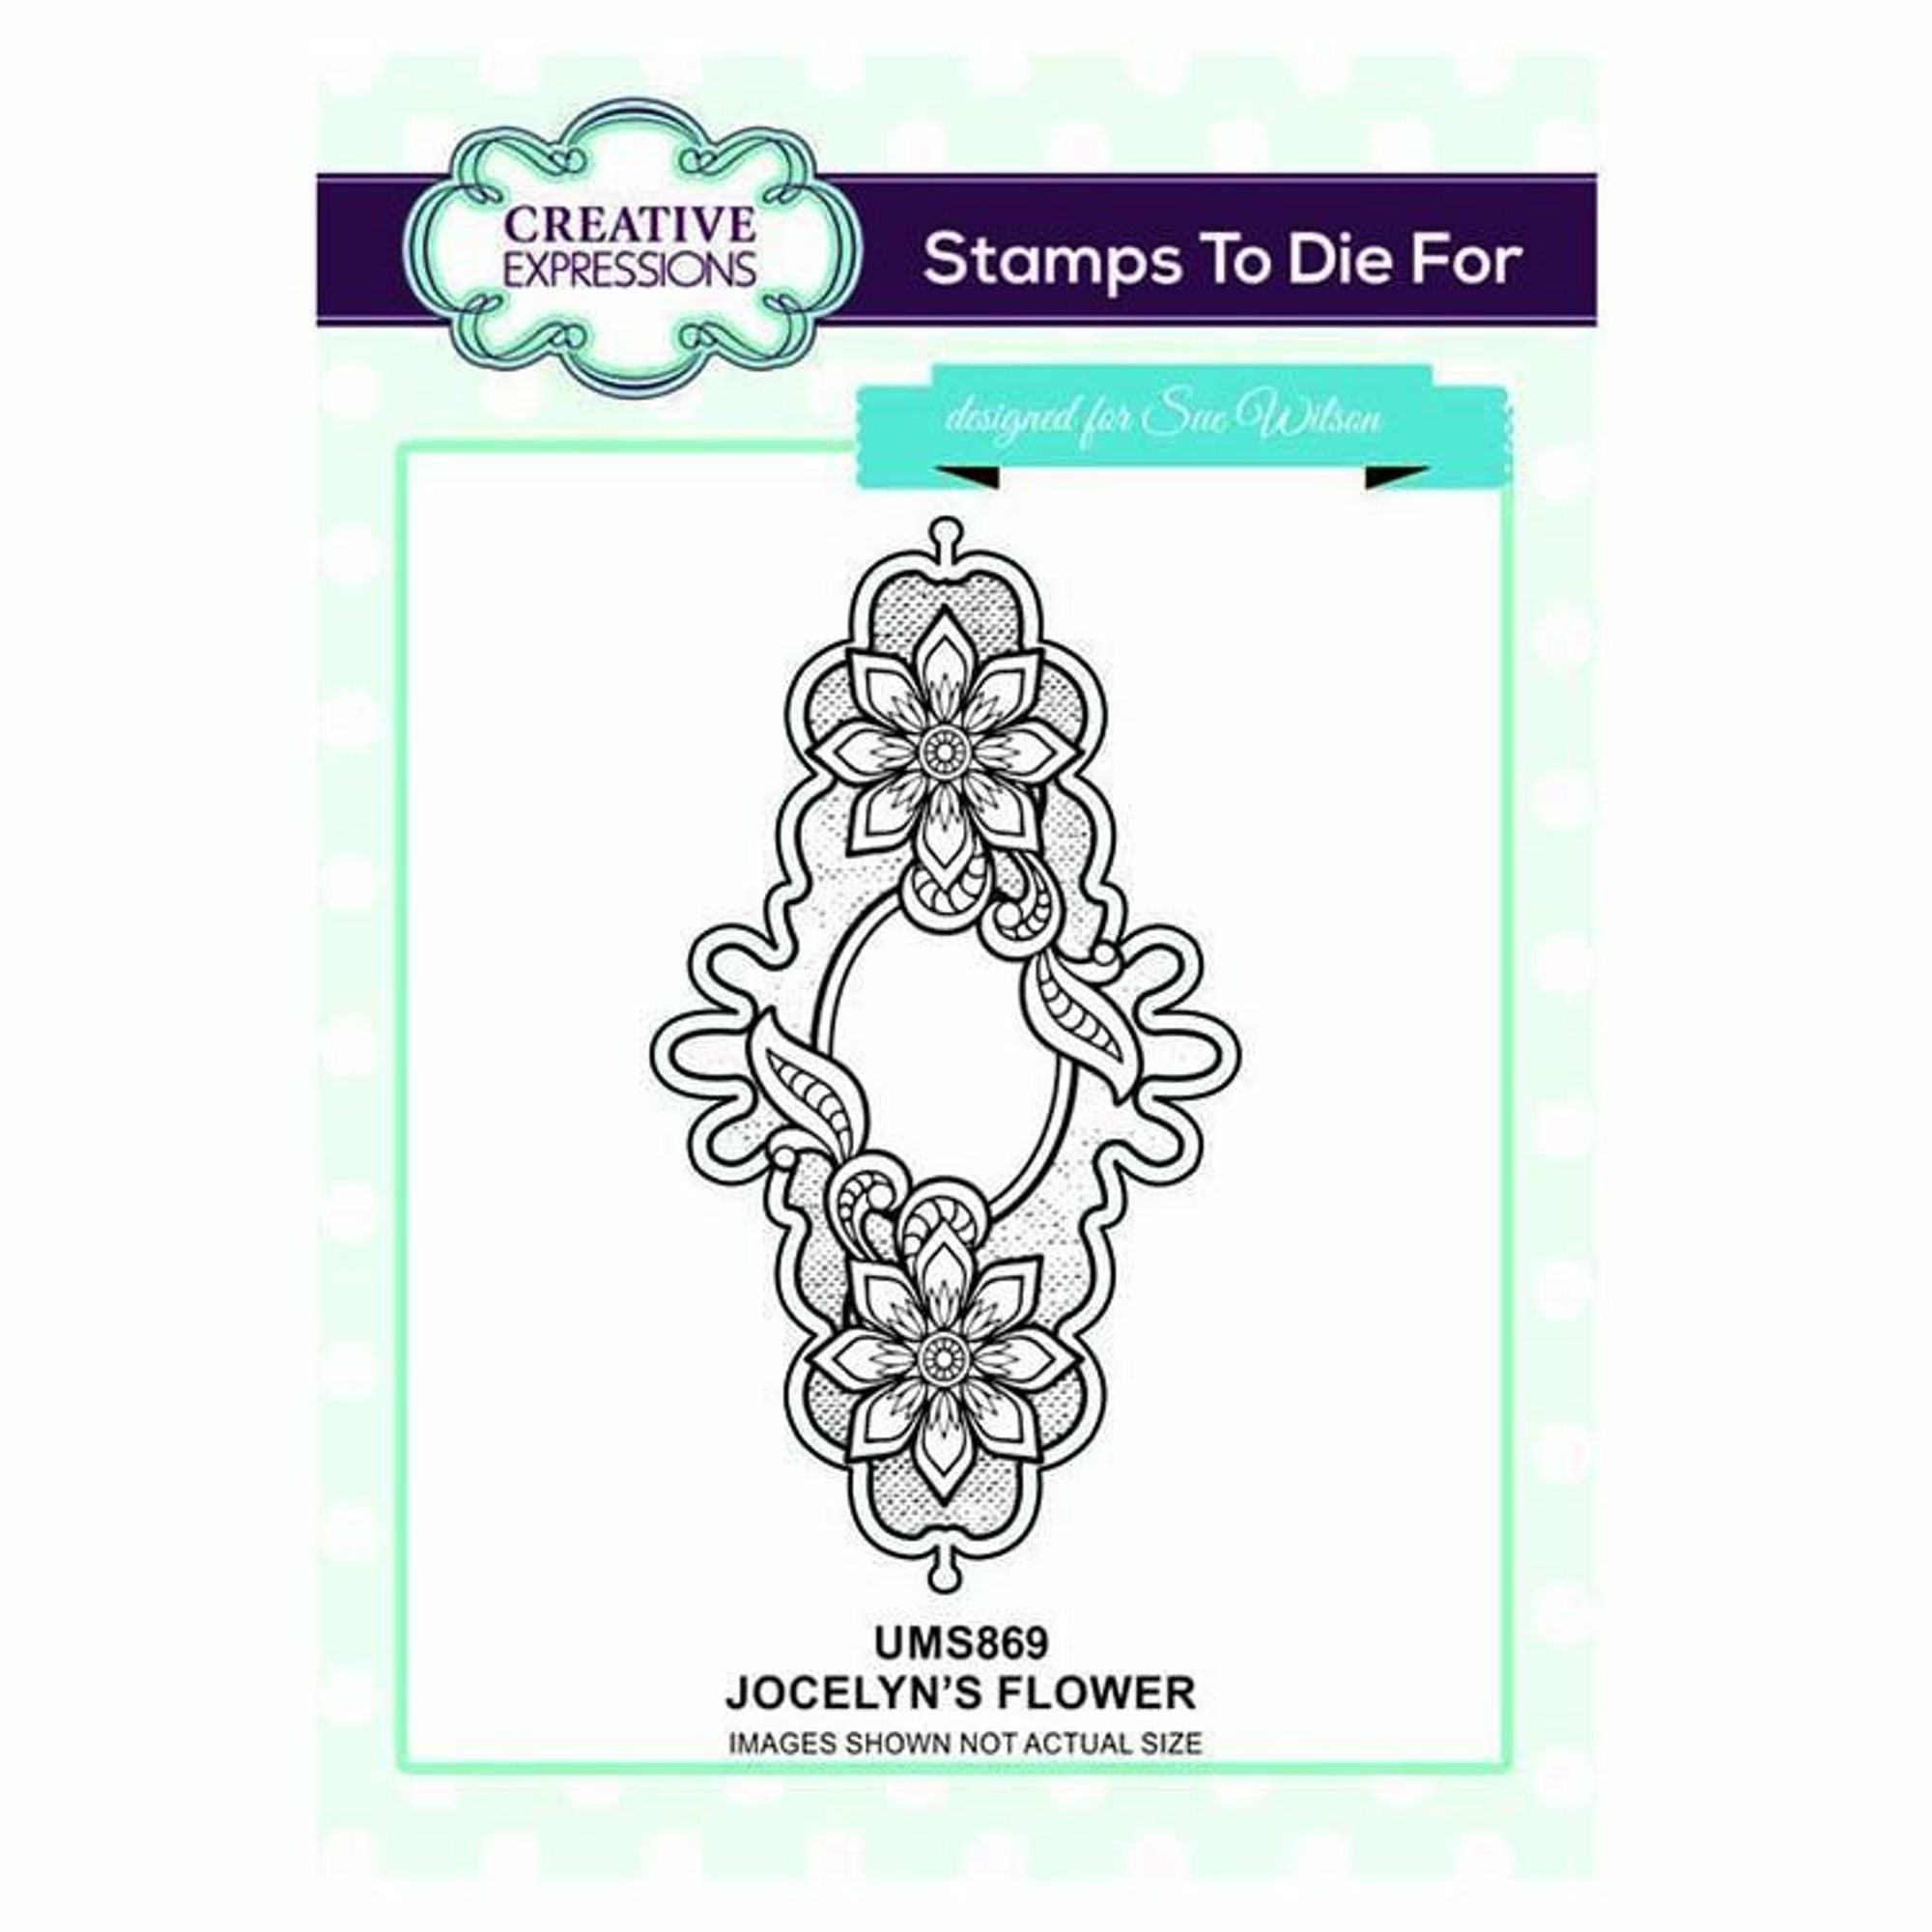 Creative Expressions Stamps To Die For Jocelyn's Flower Pre Cut Stamp